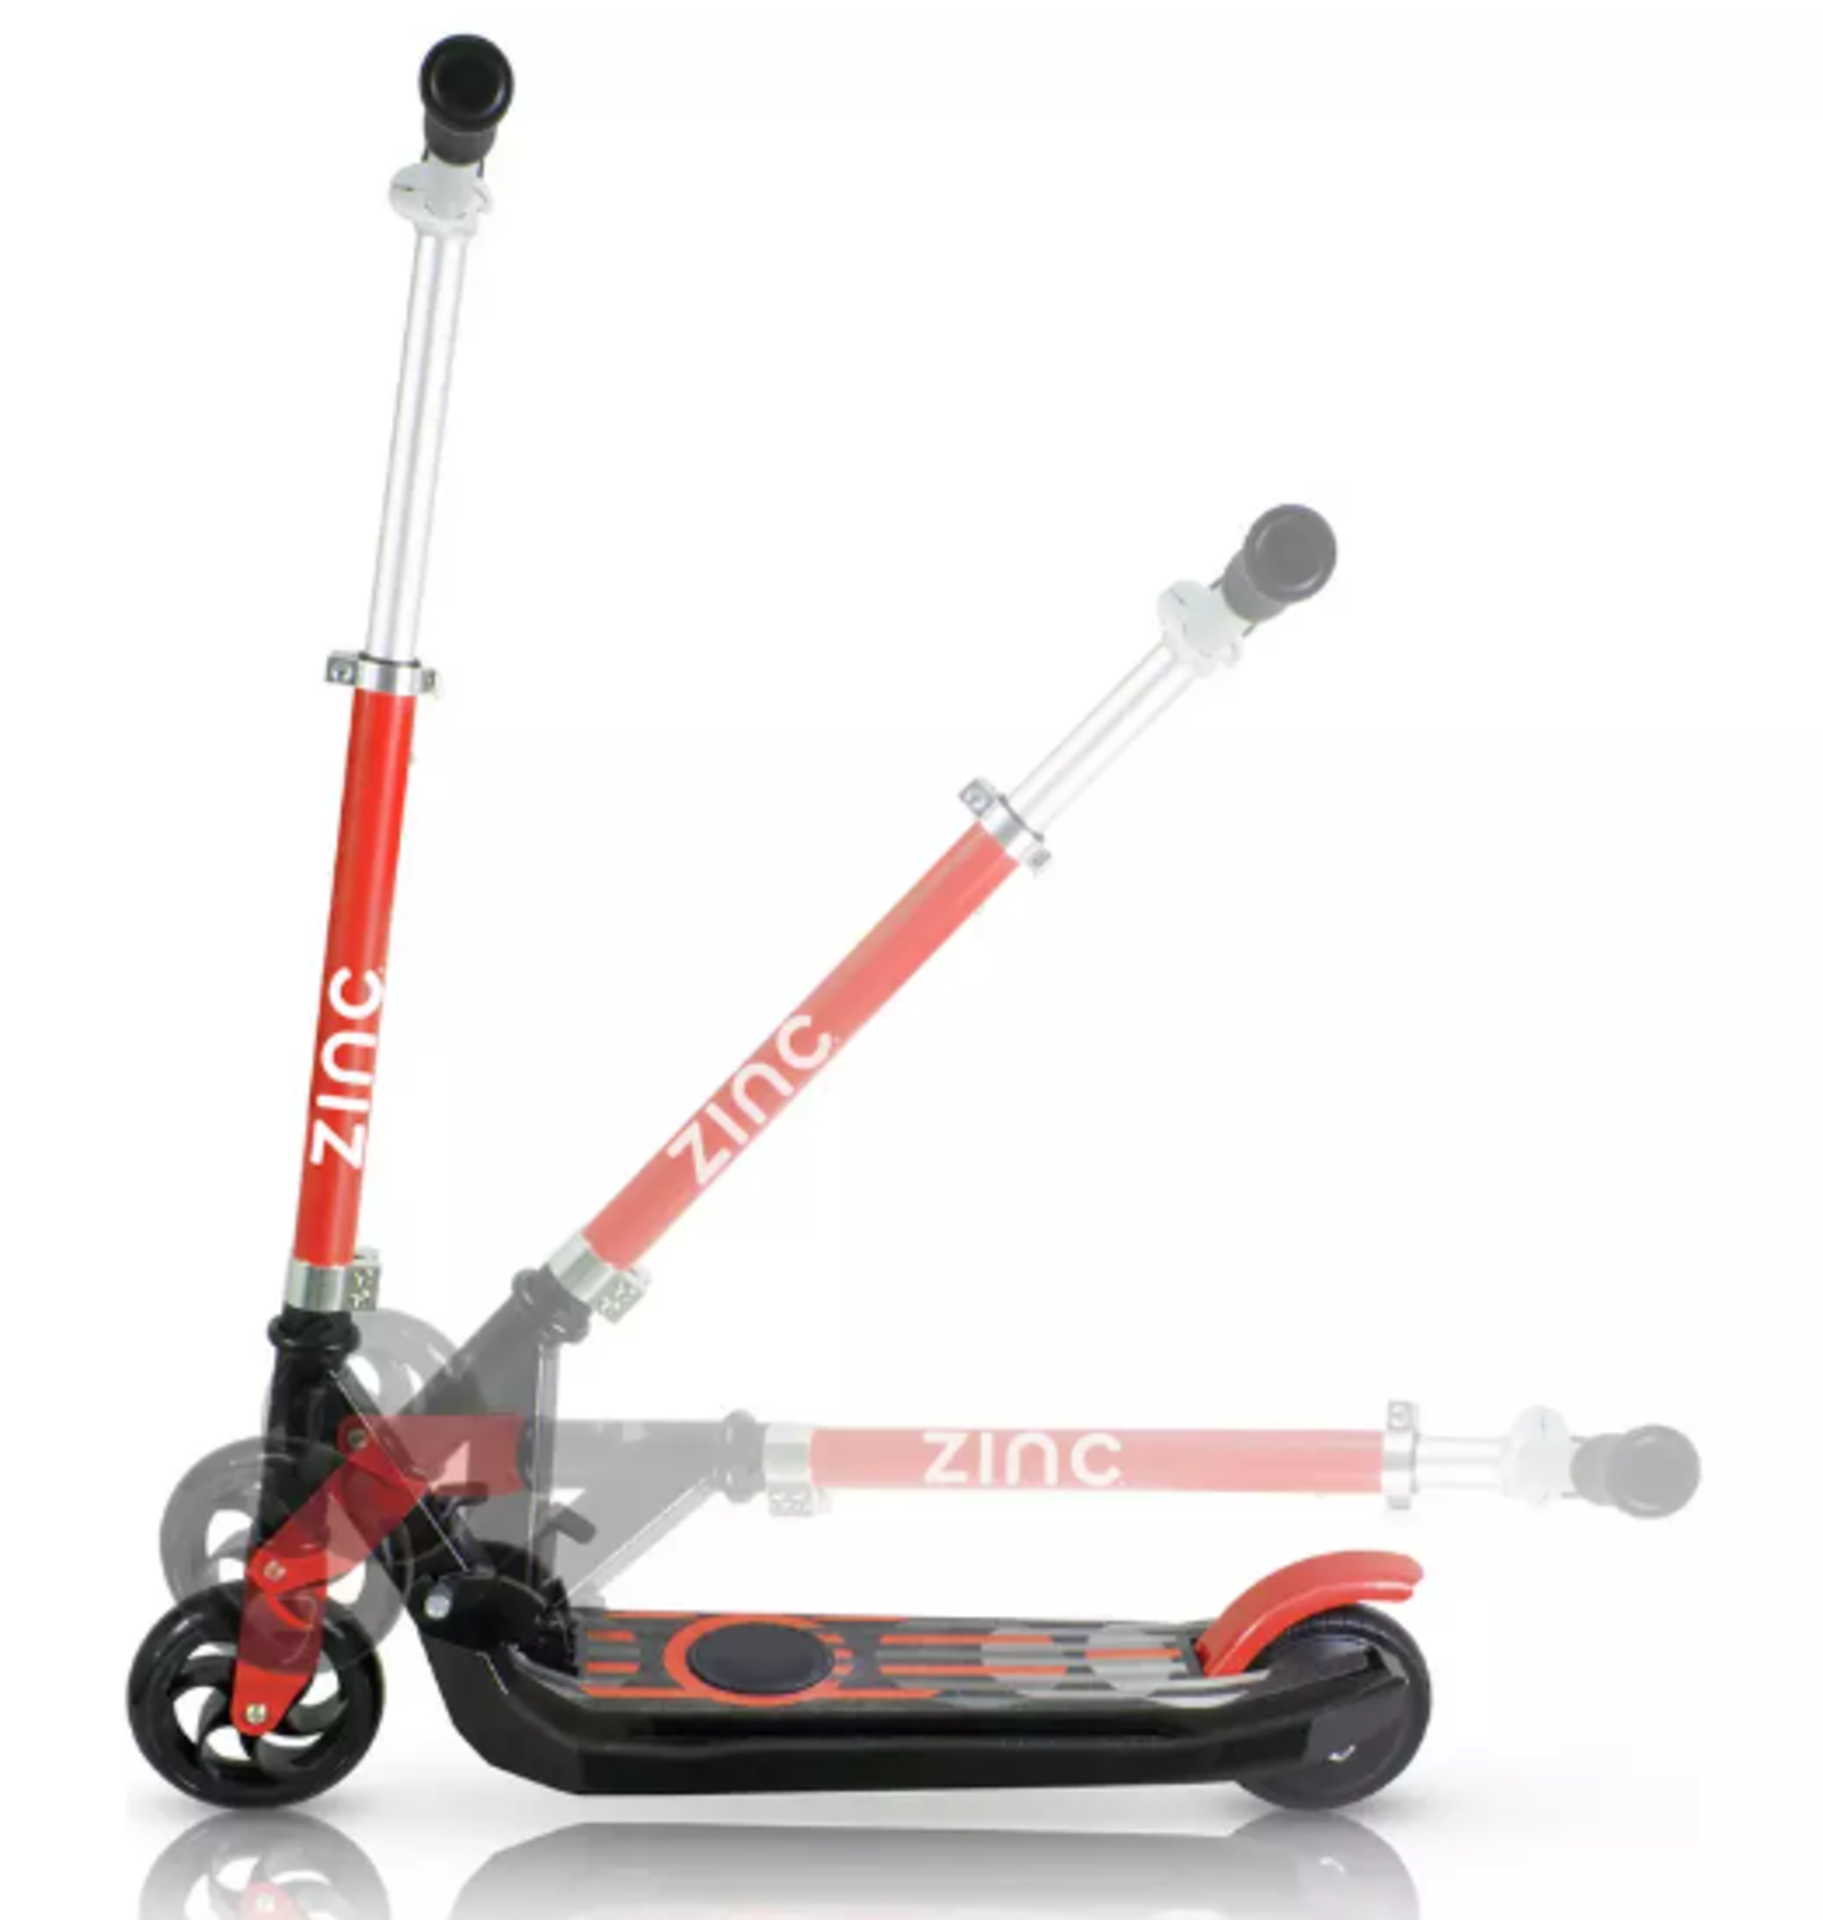 Zinc E4 Max Lithium Electric Scooter. RRP £155.00. The Zinc Folding Electric E4 Max scooter is ideal - Image 2 of 2